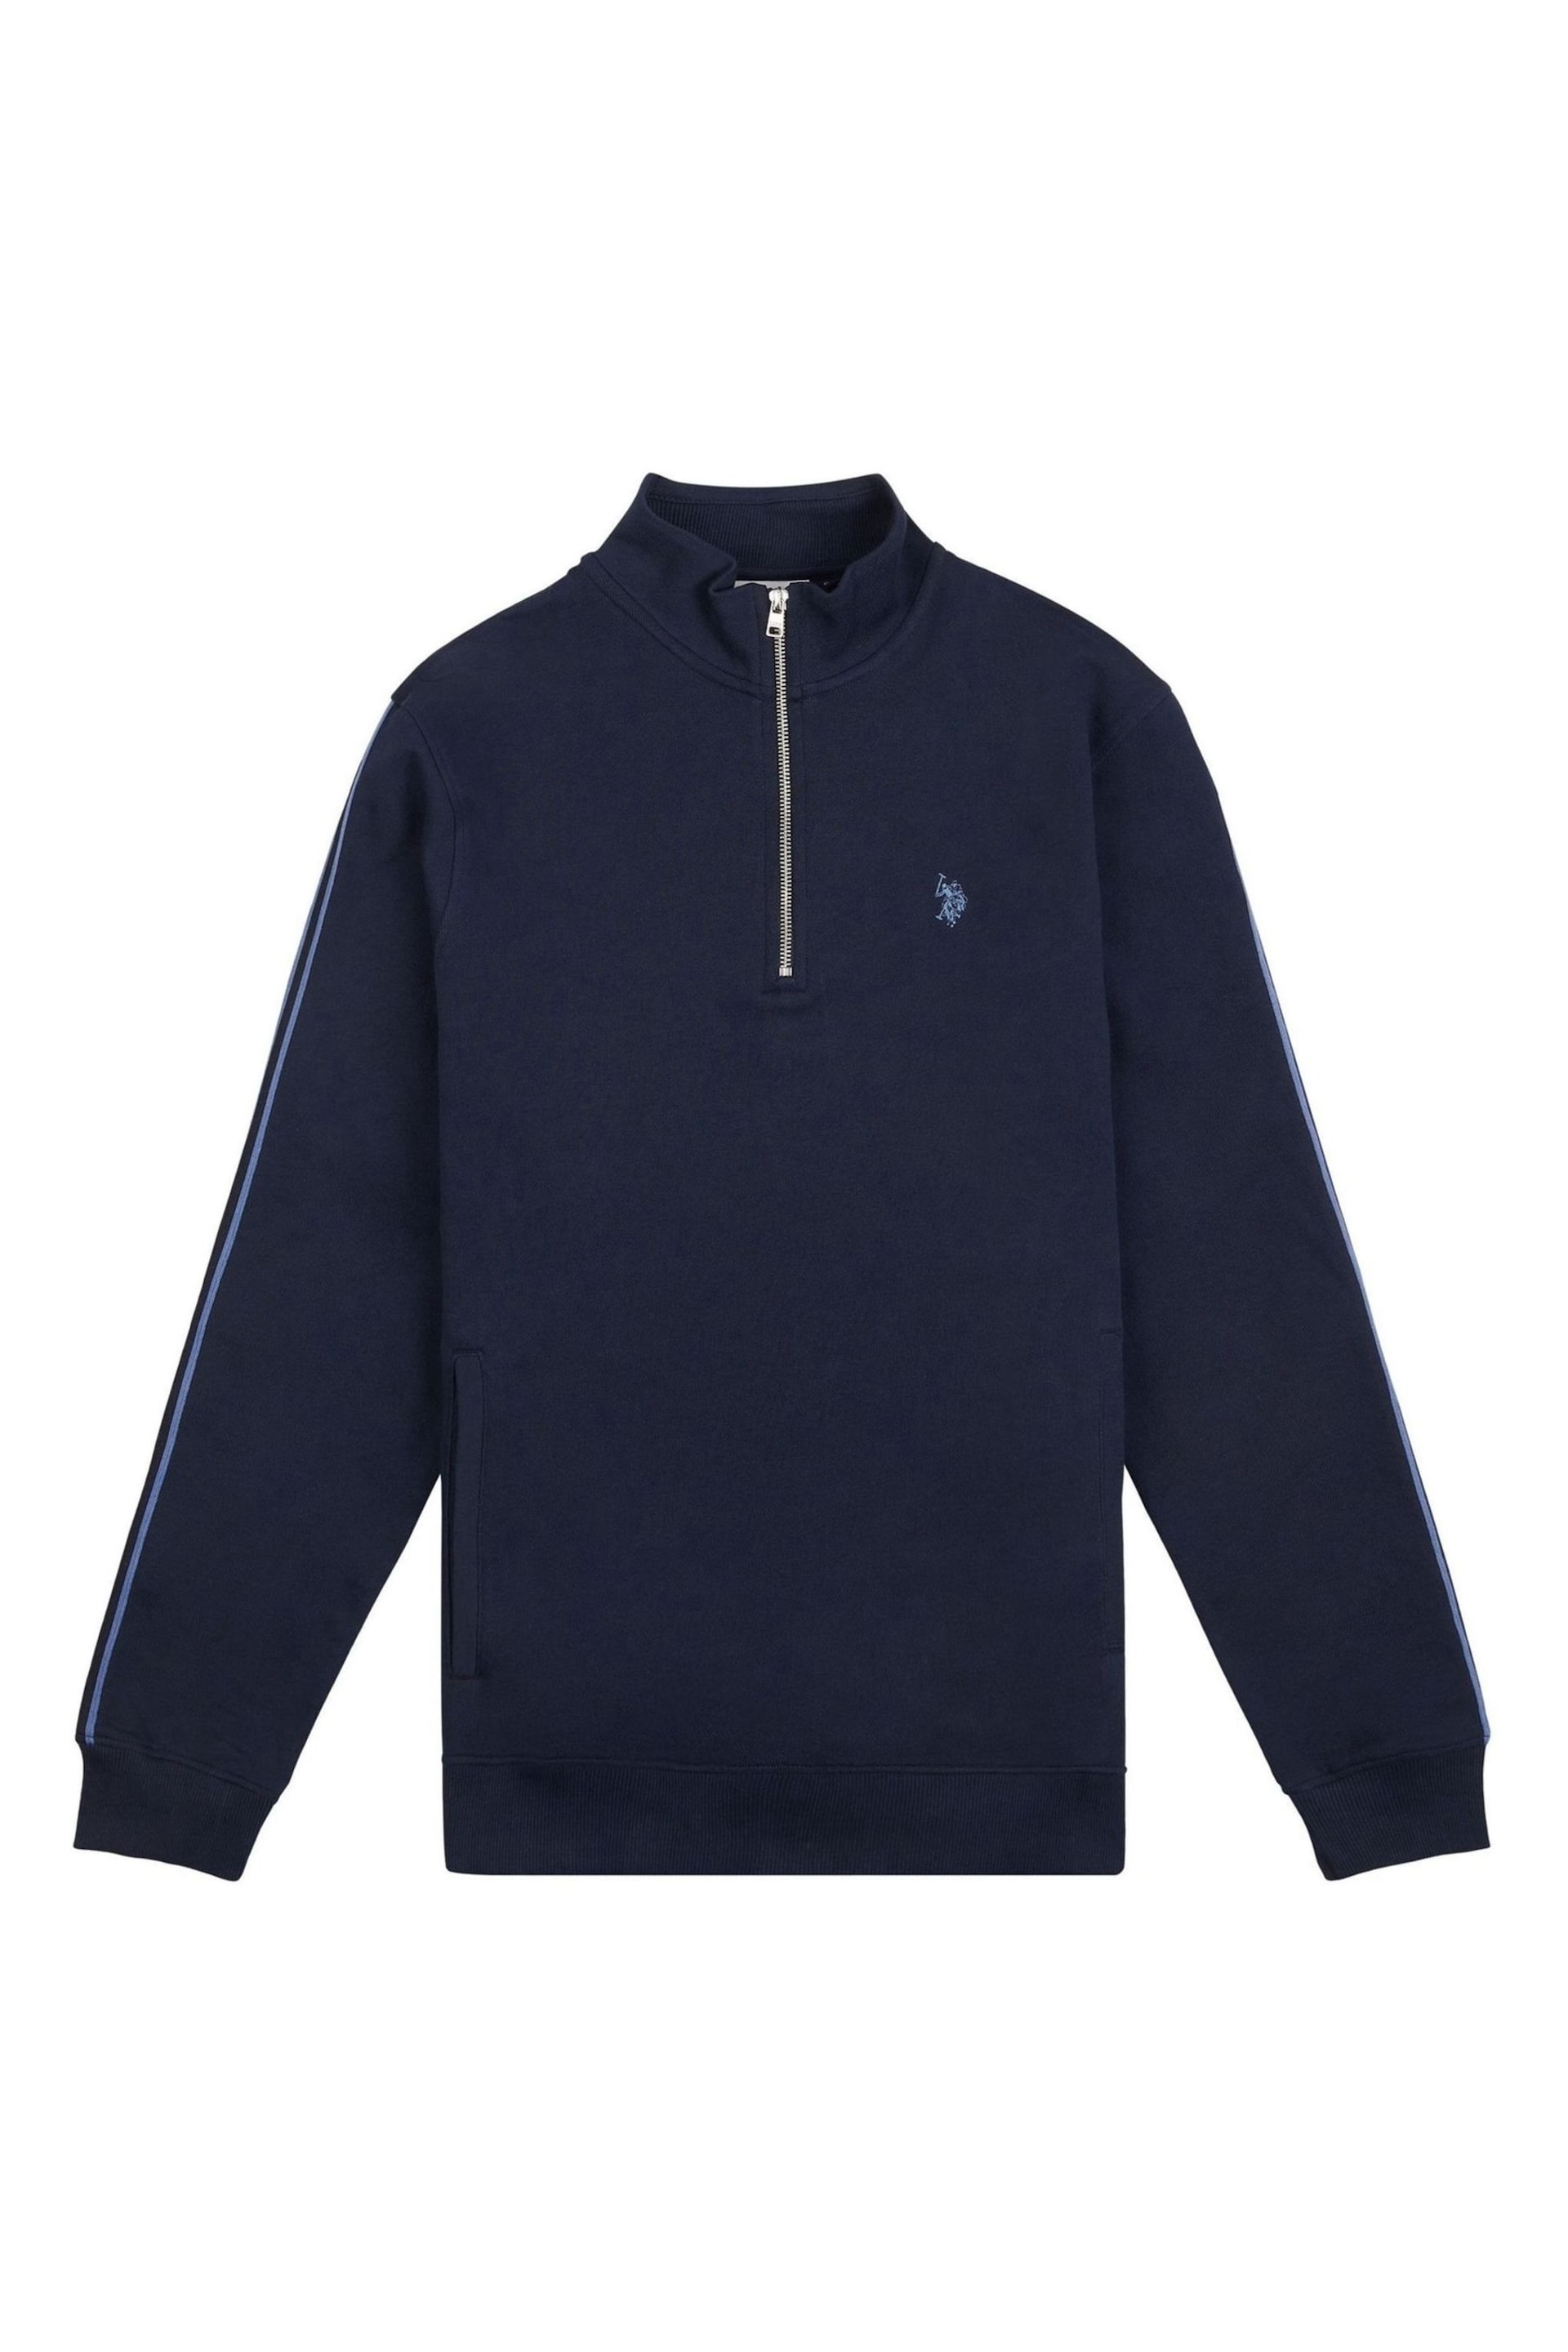 U.S. Polo Assn. Mens Blue Classic Fit Taped 1/4 Zip Sweatshirt - Image 5 of 8